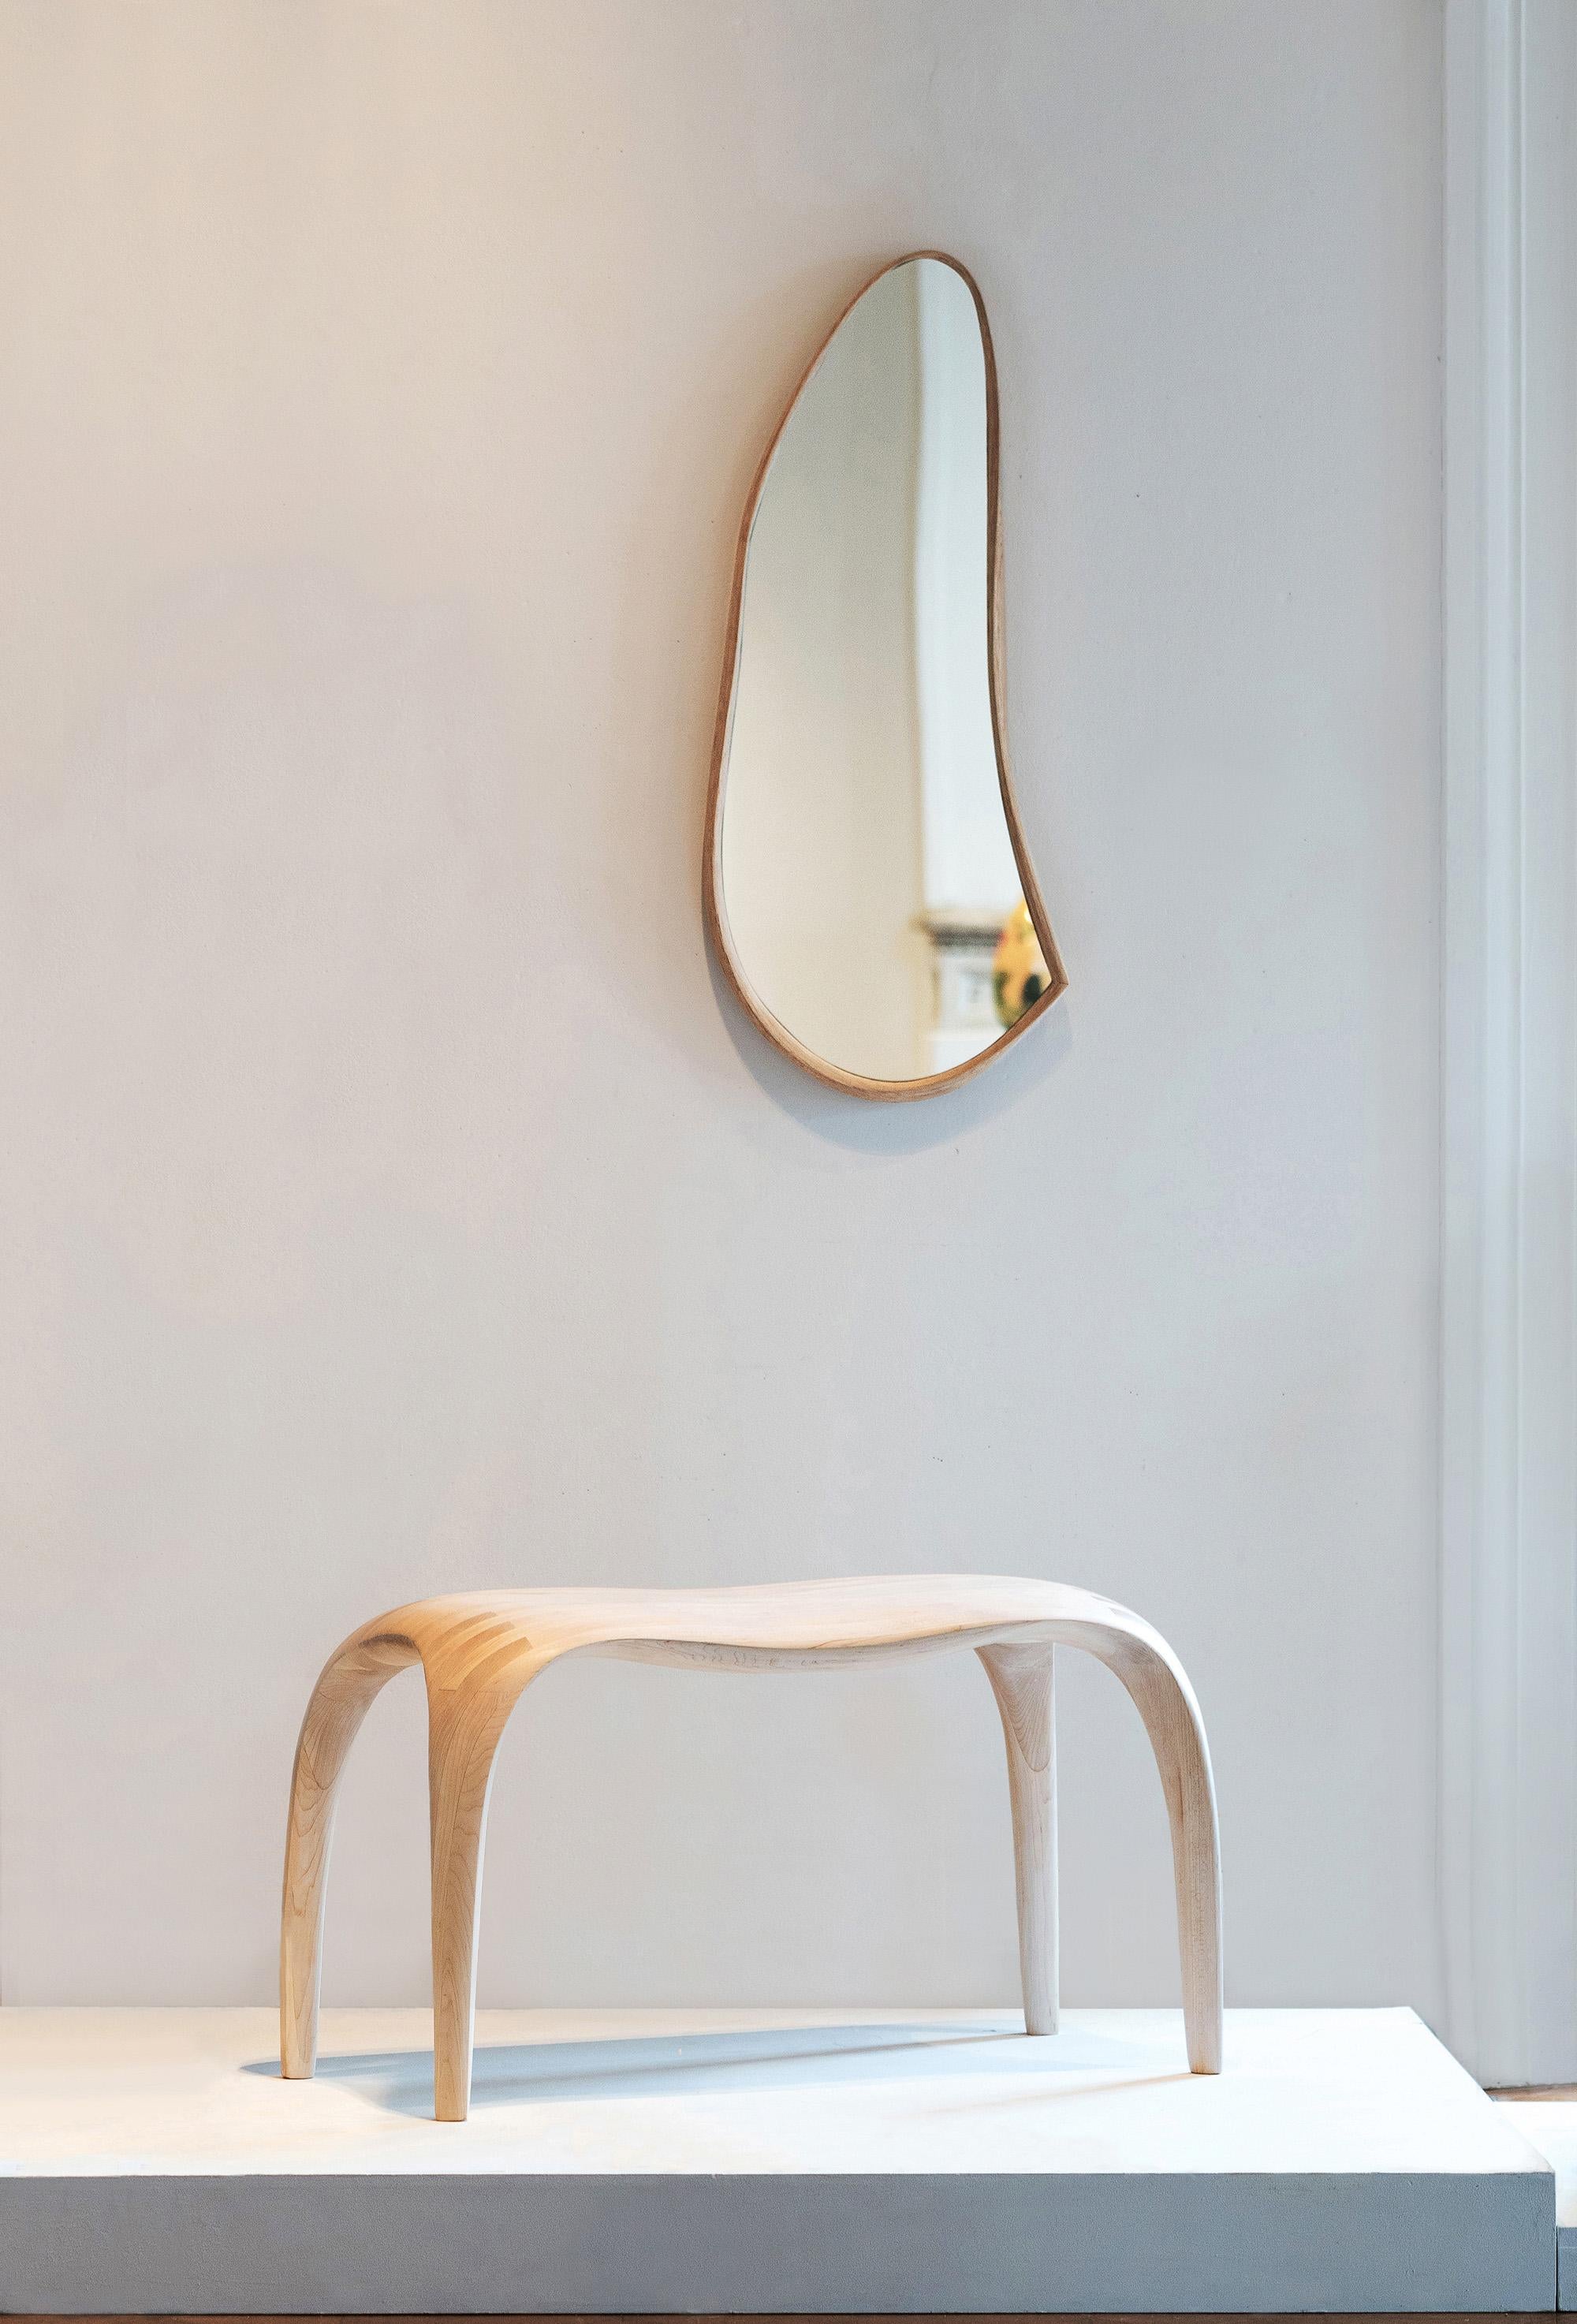 'Momentum Mirror' by Soo Joo is an asymmetric and organic wall mirror. It has a timeless aesthetic, and the distilled form fits into any interior. Thirty to fifty layers of thin wood veneer are carefully laminated in place to create the form, and